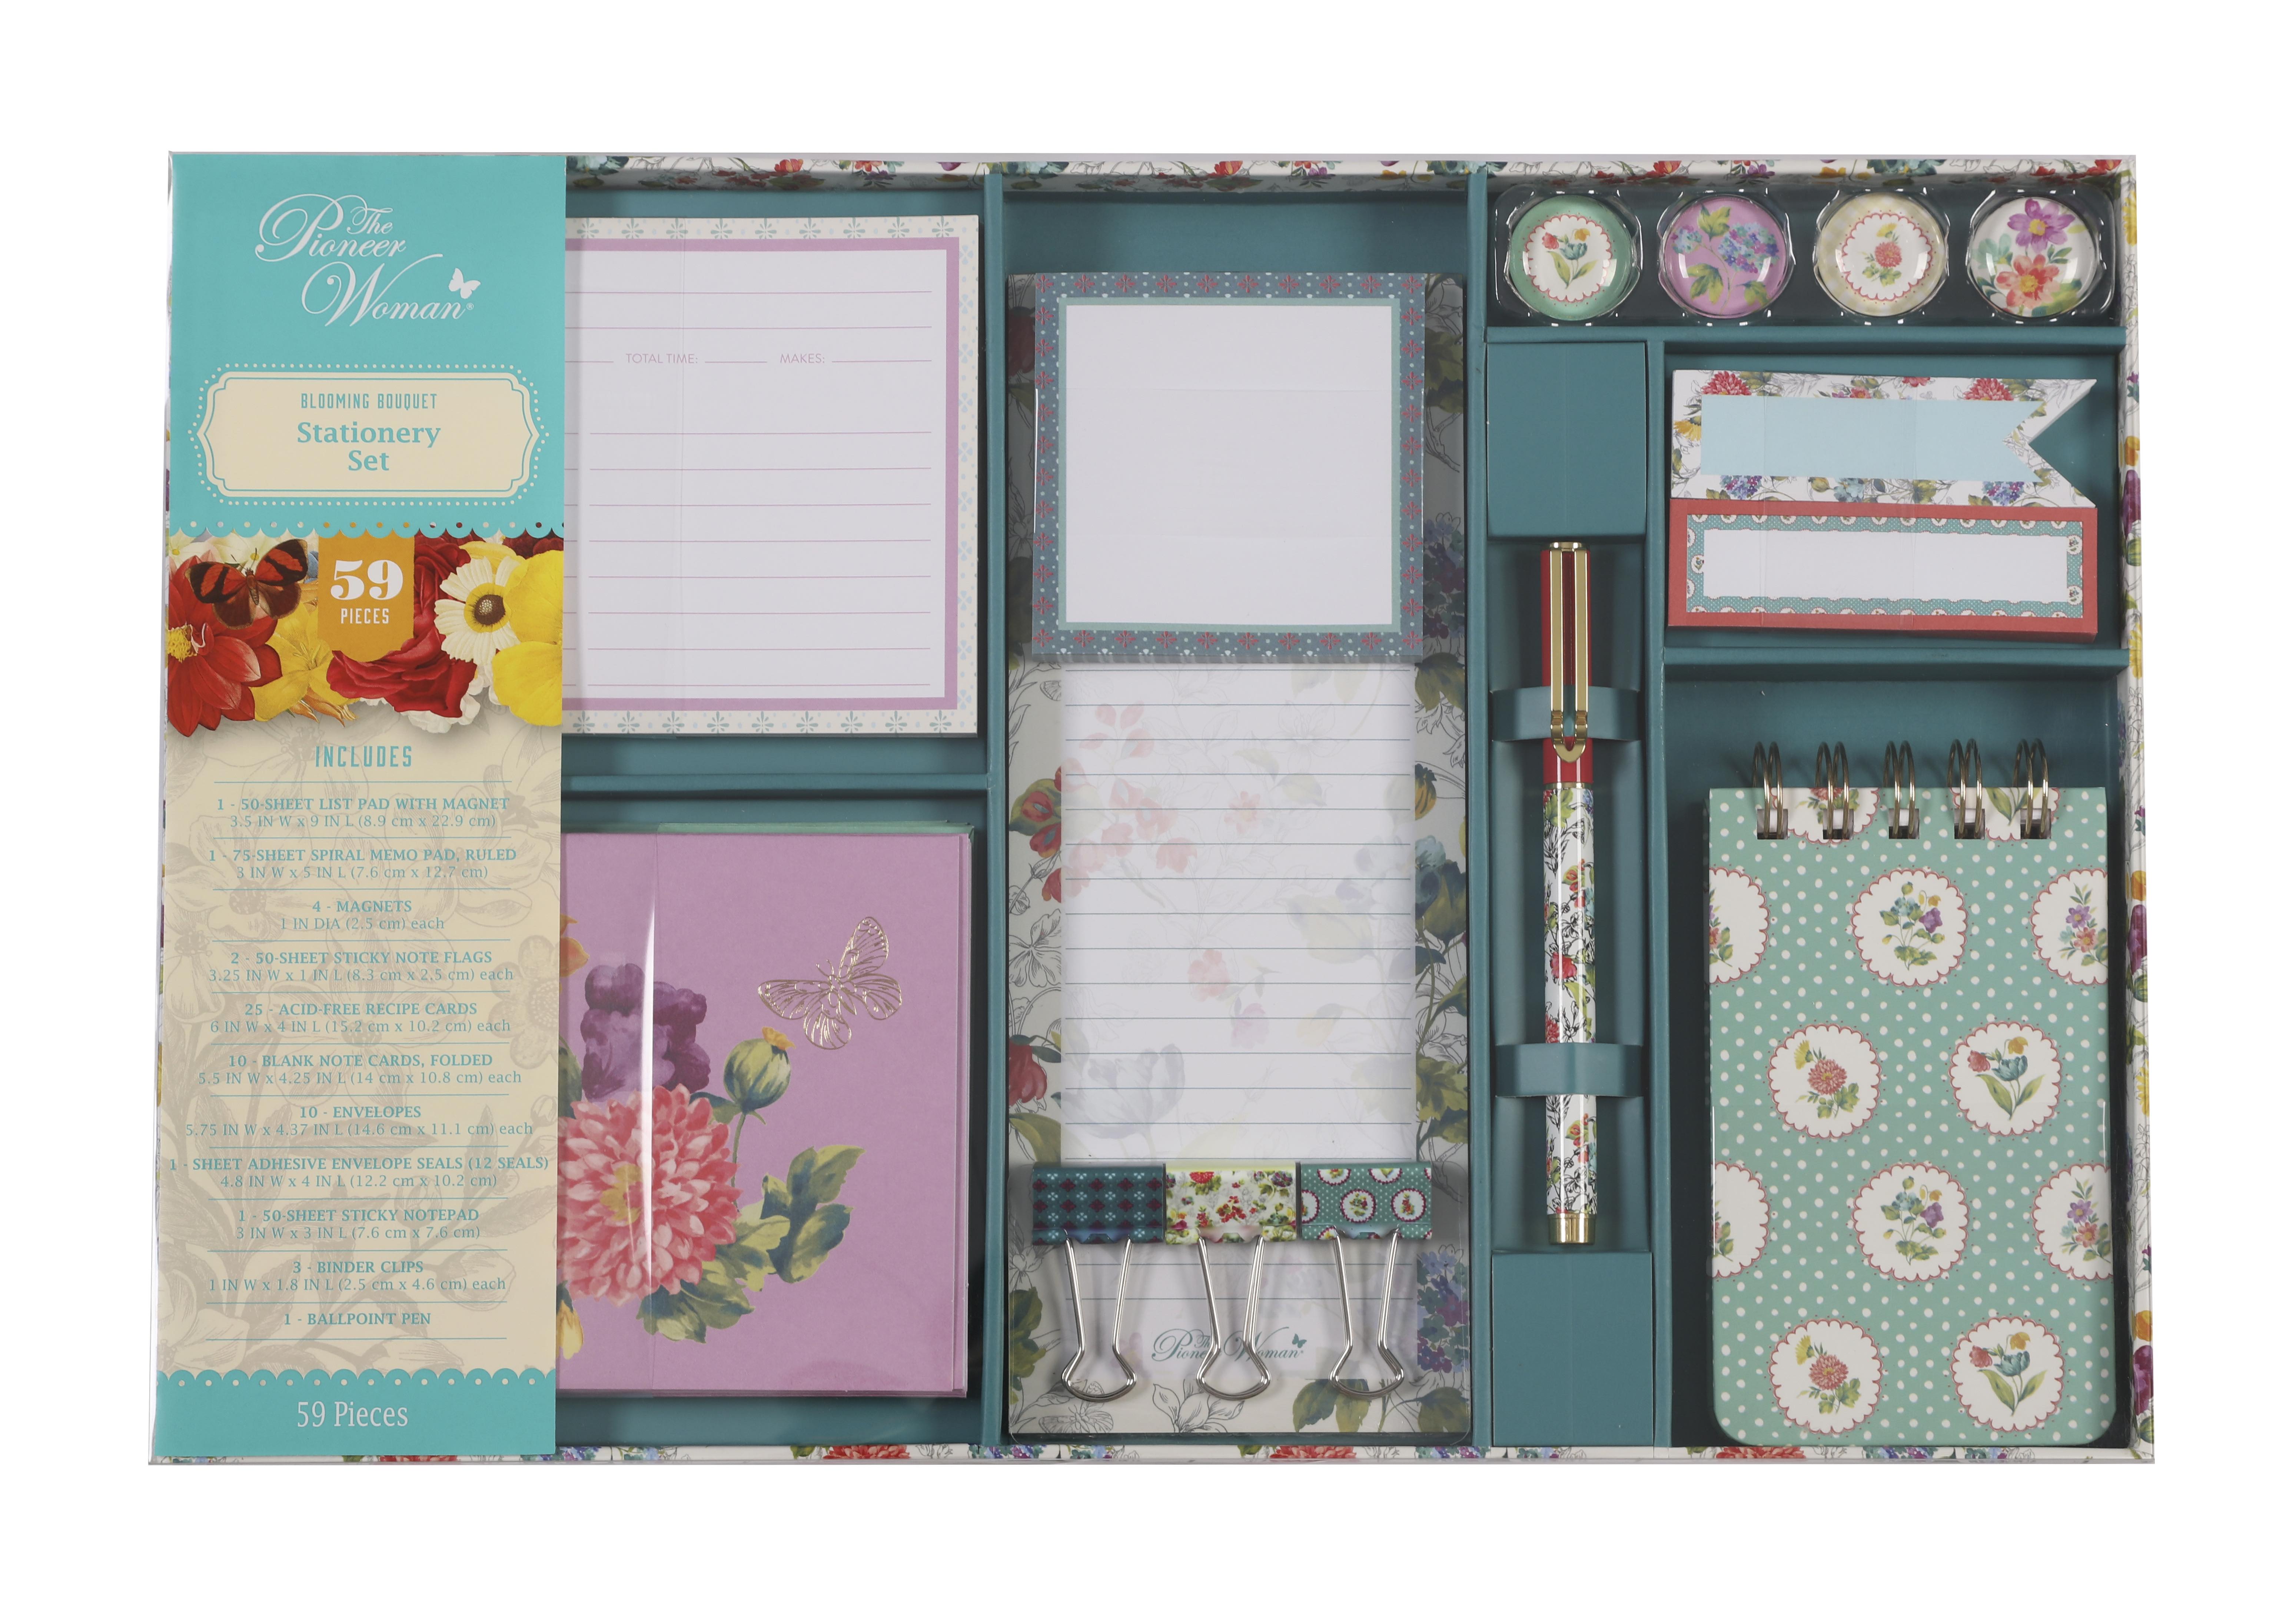 The Pioneer Woman Blooming Bouquet 59-Piece Stationery Set